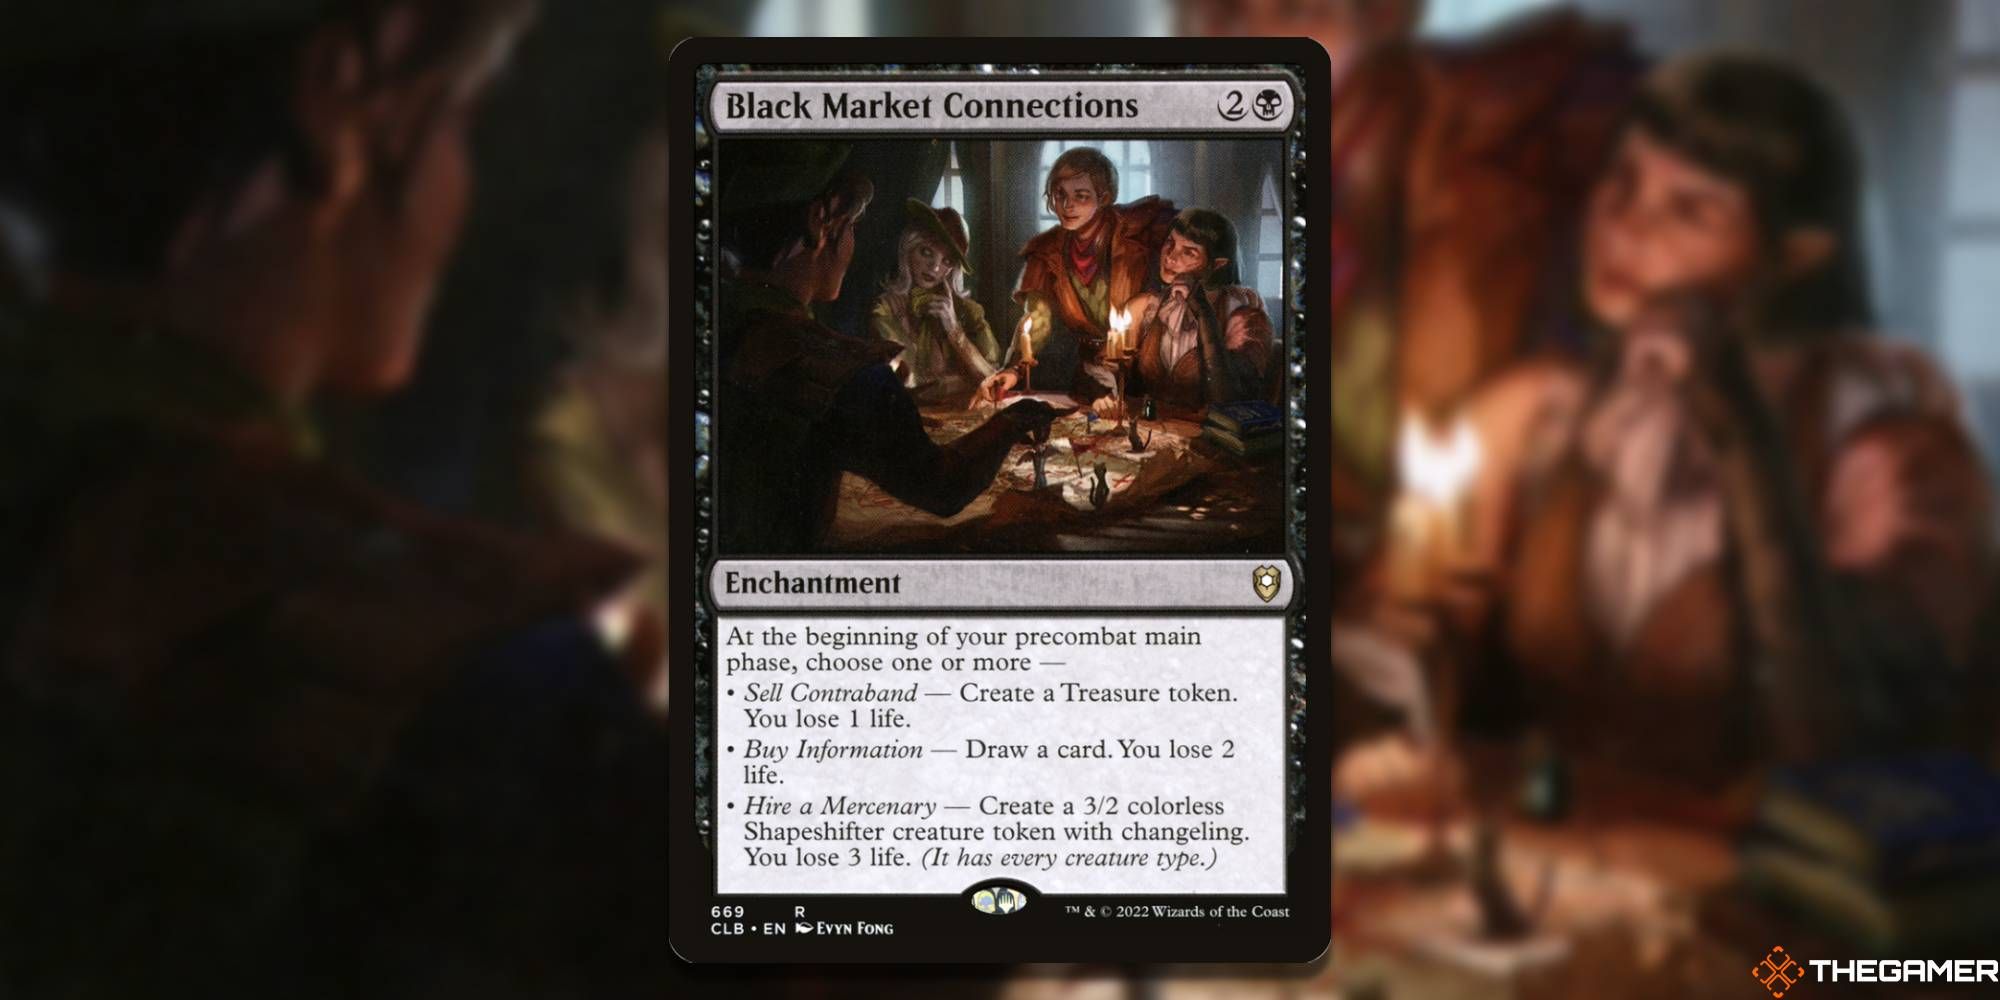 Black Market Connections by Evyn Fong